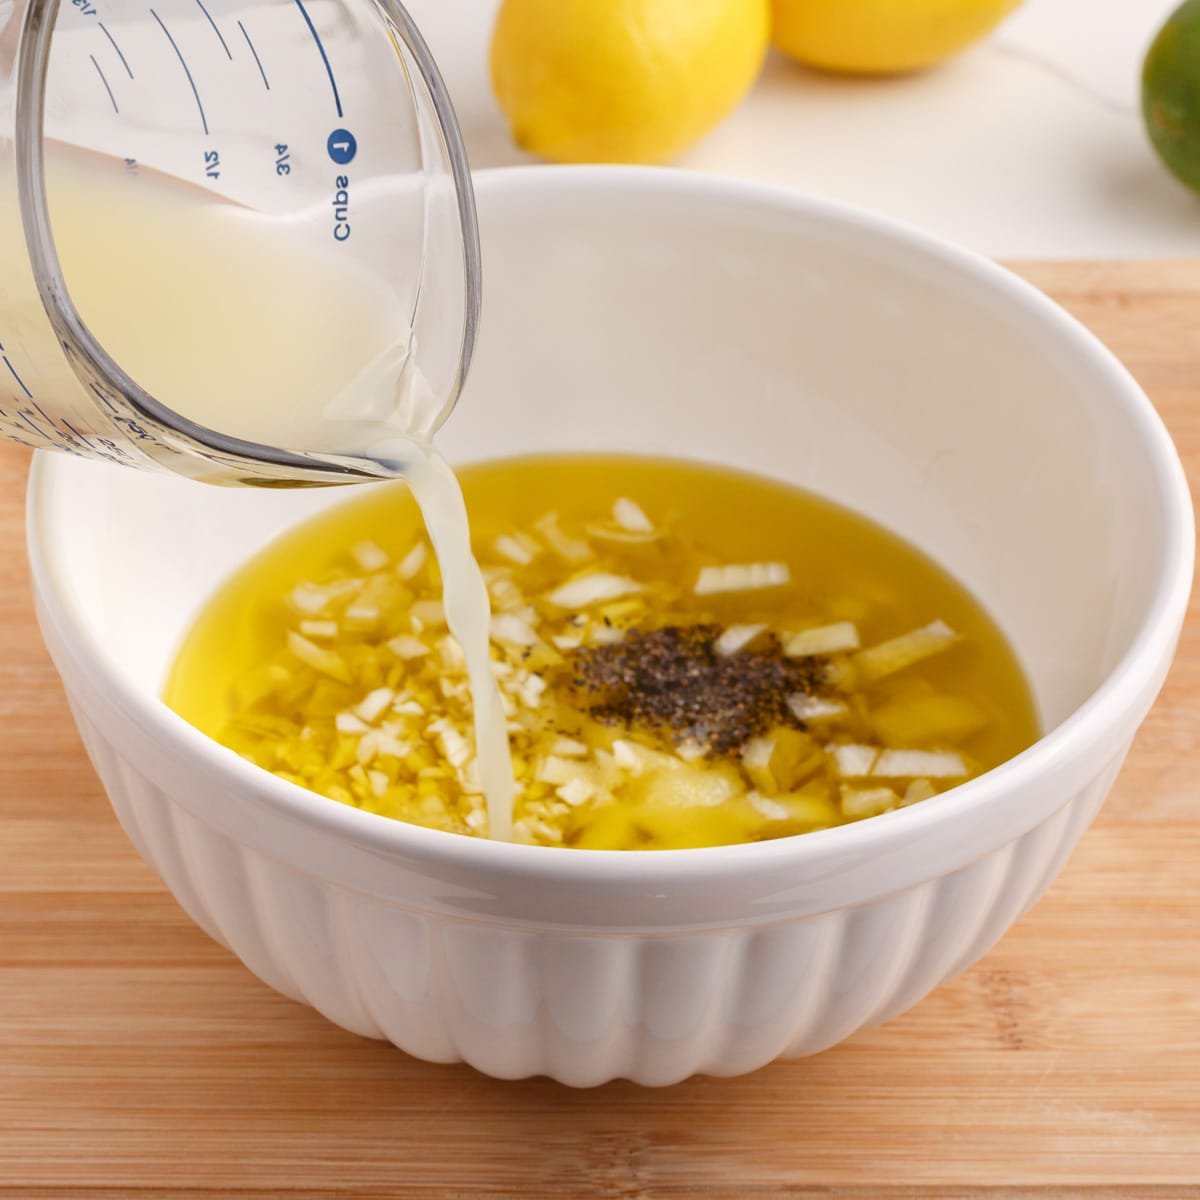 lemon juice pouring into a bowl with oil and onion